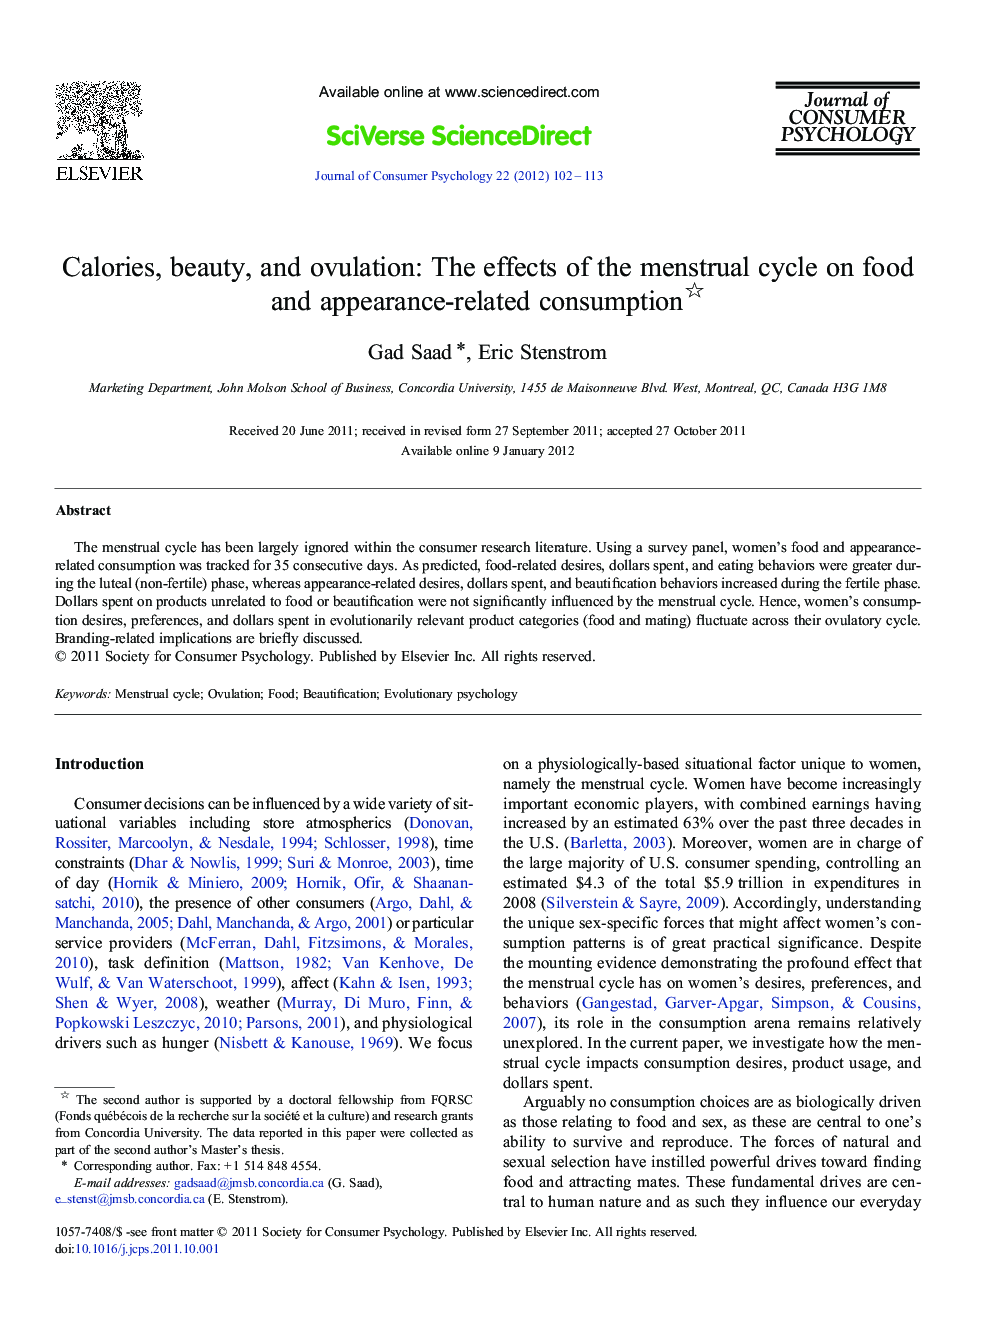 Calories, beauty, and ovulation: The effects of the menstrual cycle on food and appearance-related consumption 